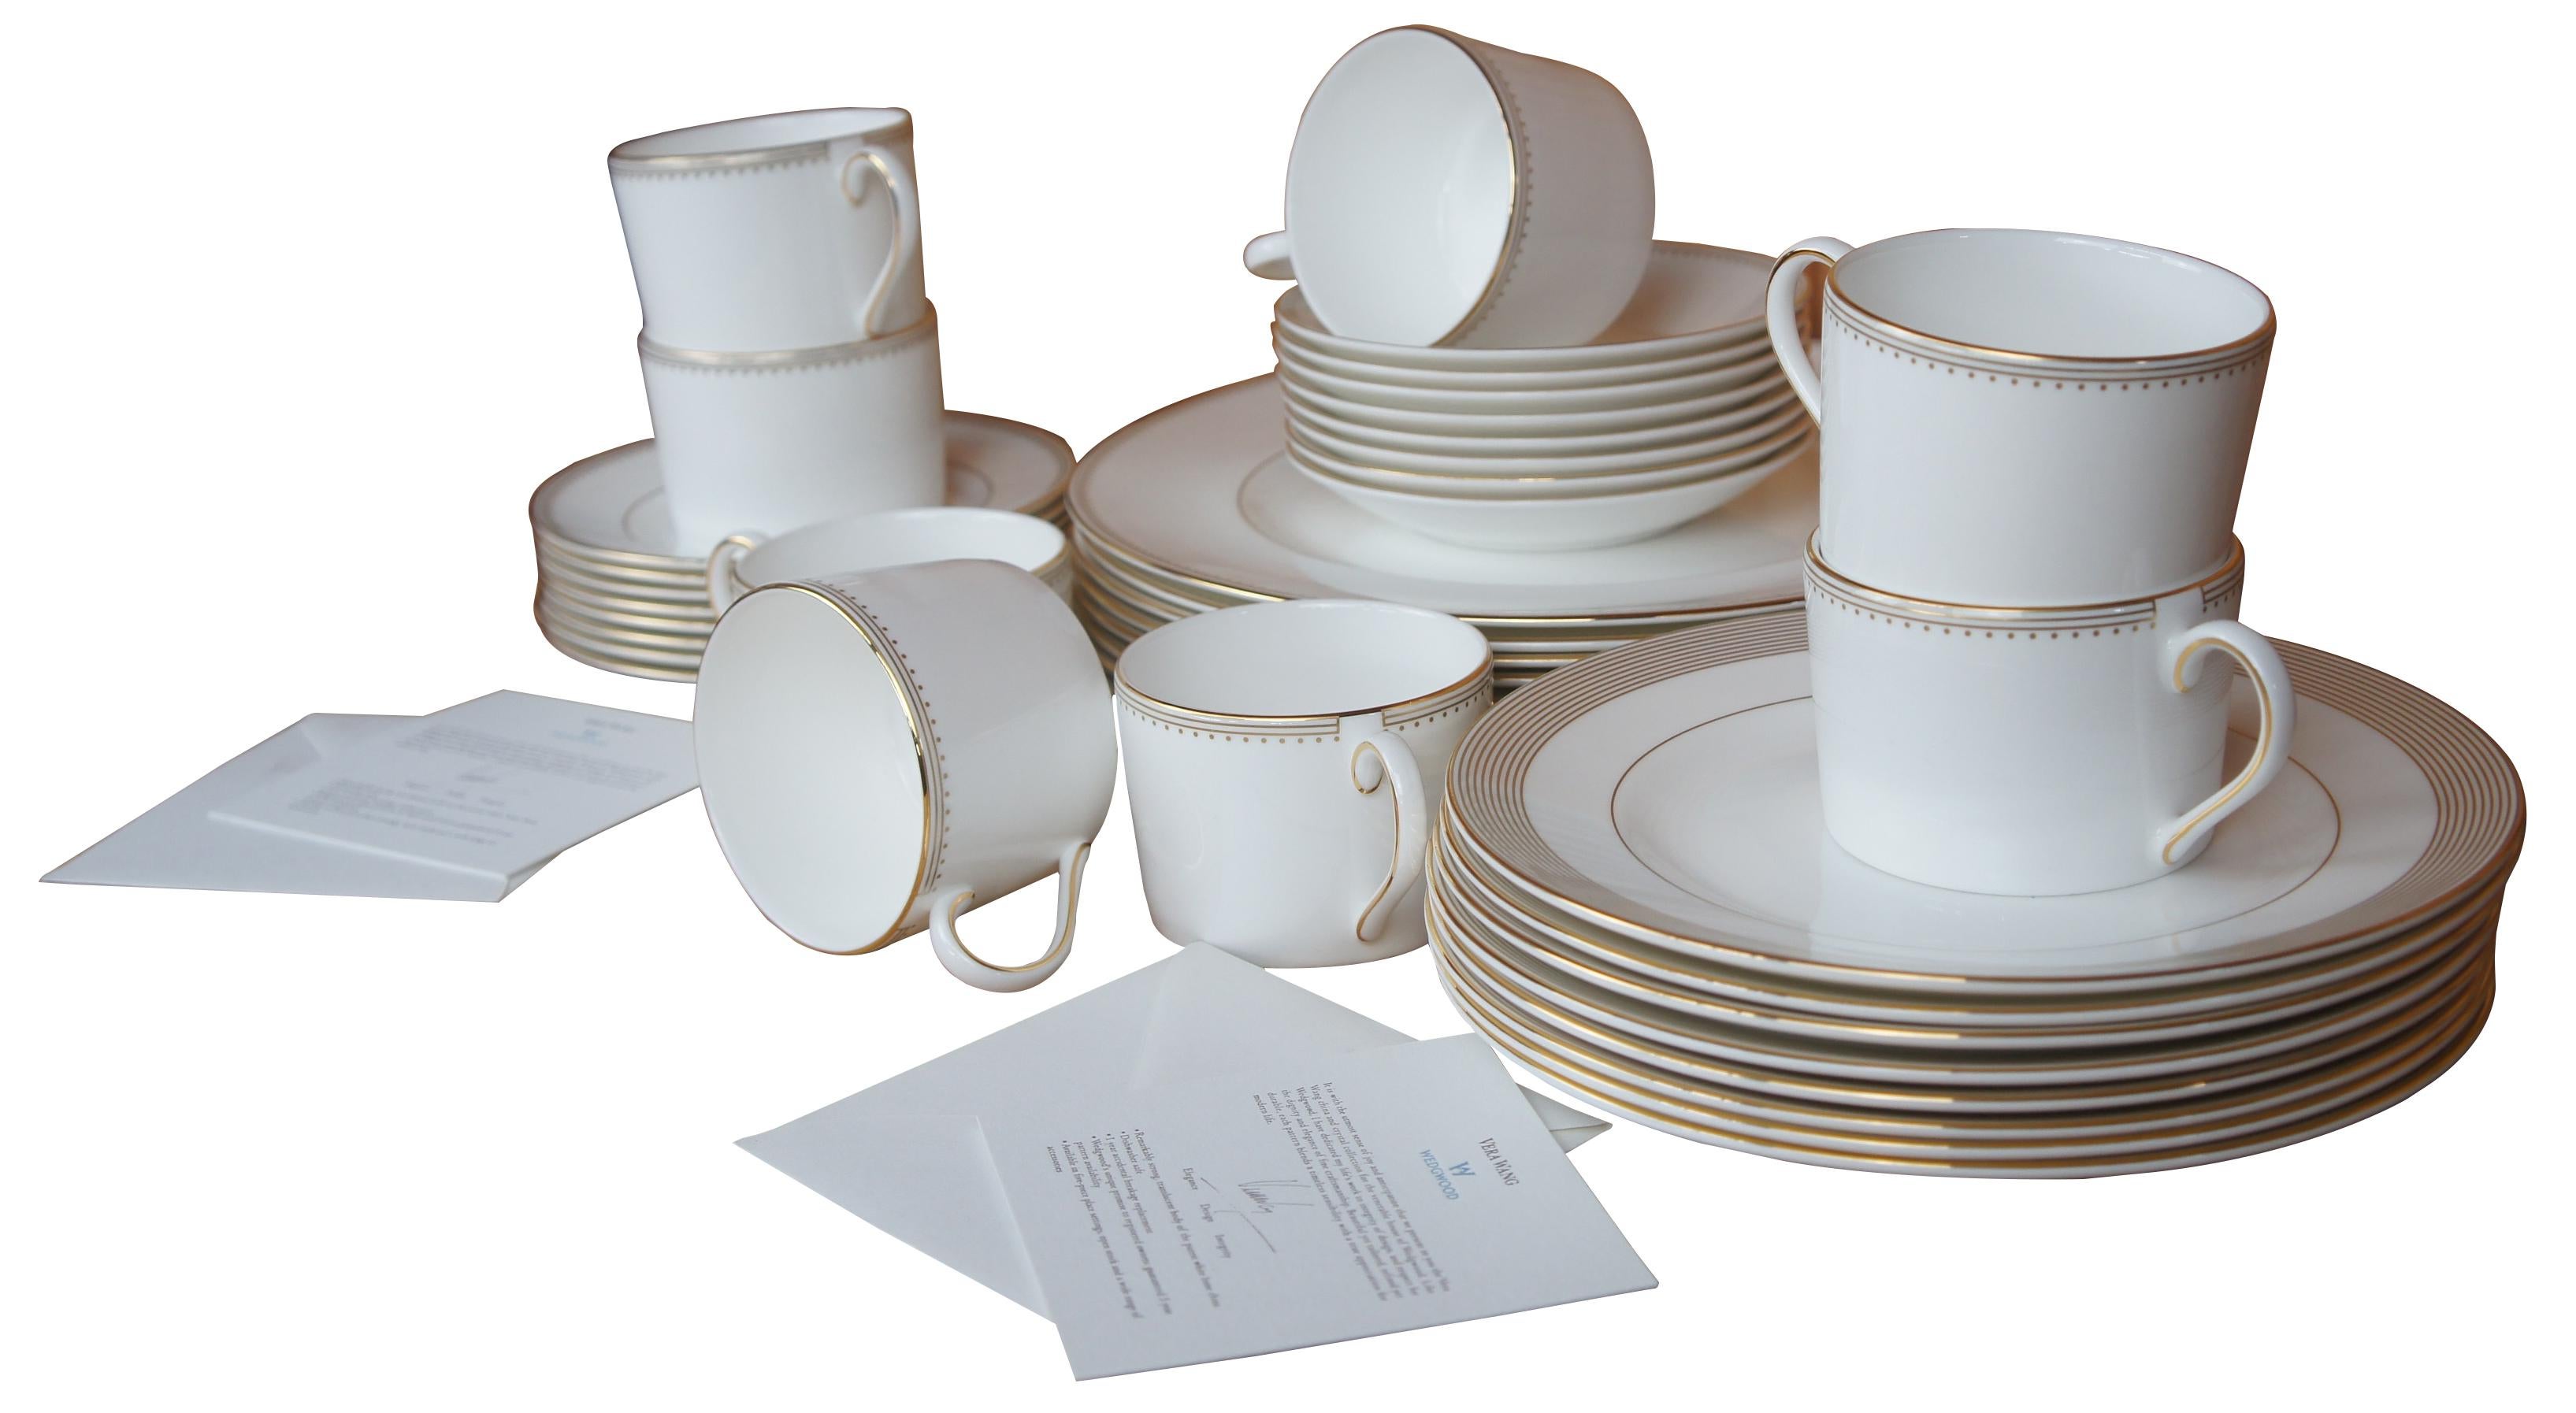 Beautiful 40 piece china set, ‘Golden Grosgrain’ pattern by Vera Wang from Wedgwood China. Set includes place setting for 8, tea/coffee cups, saucers, bread plates, salad plates and dinner plates.

Measures: 8 cups- 3.25